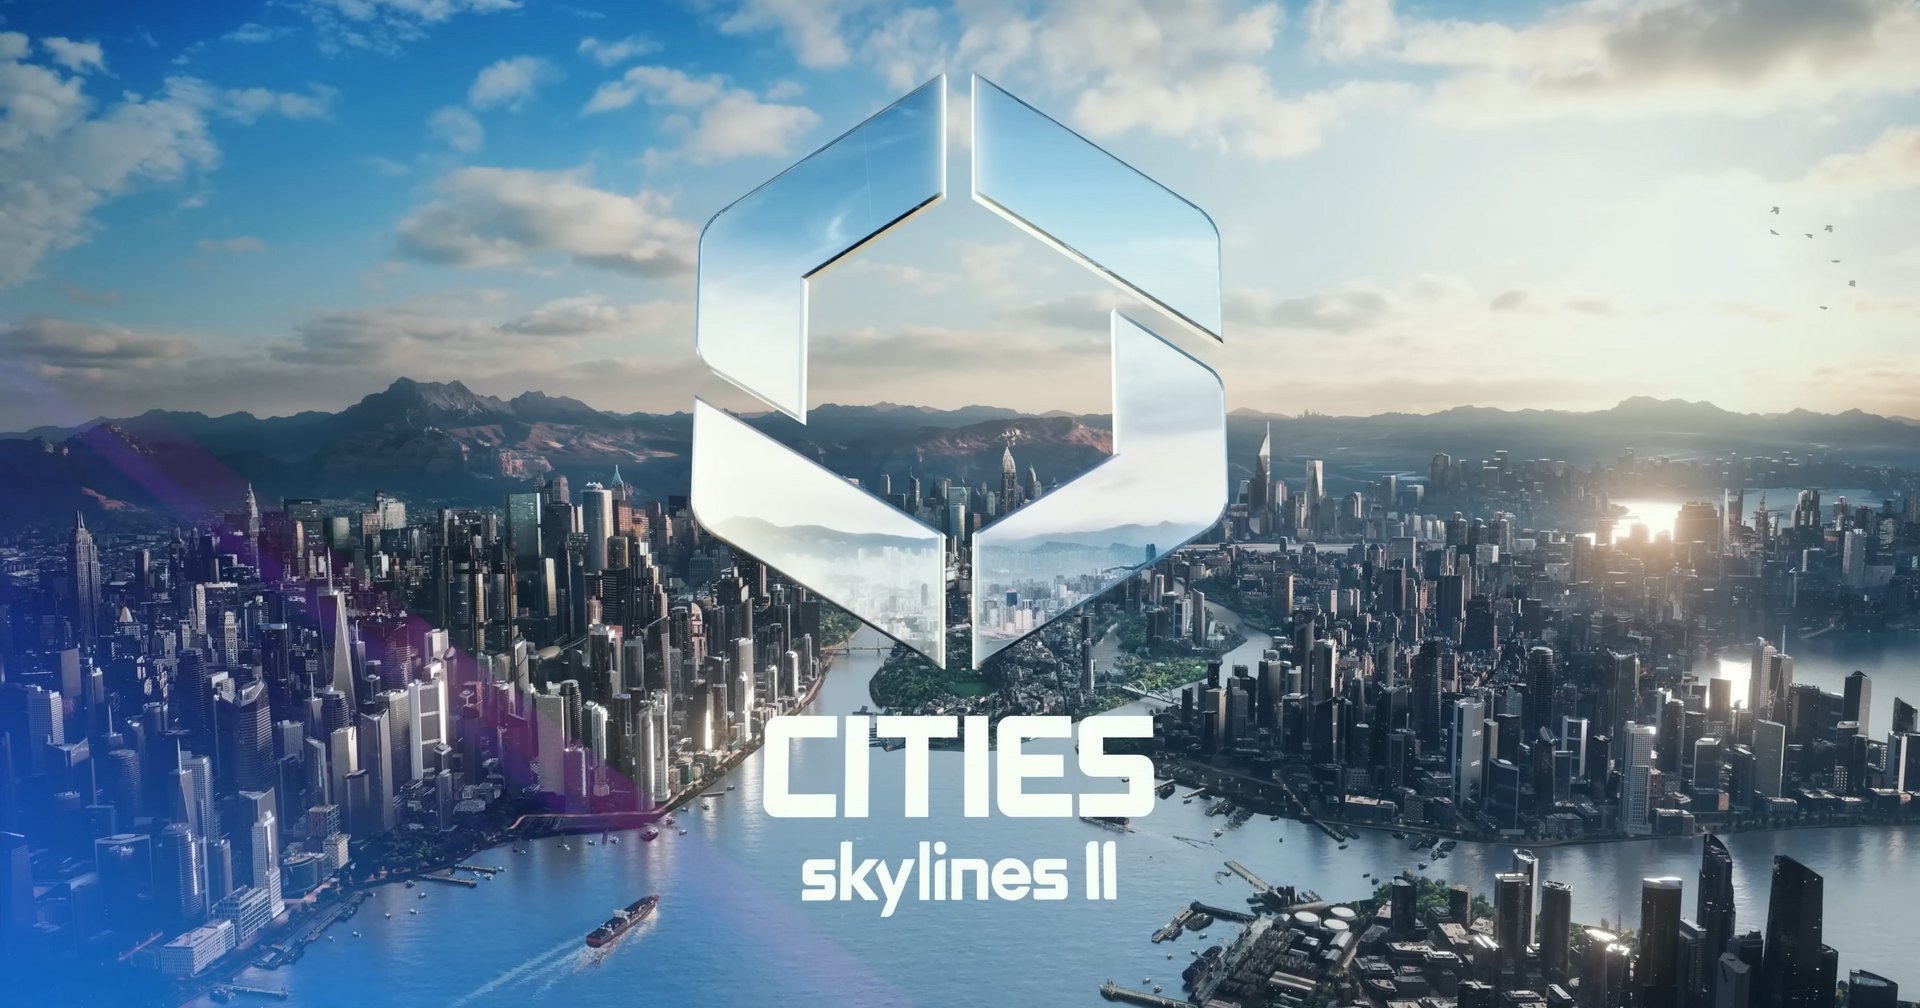 Here we see the title and logo of Cities Skylines 2 in front of a city with many skyscrapers. There is no release date yet.